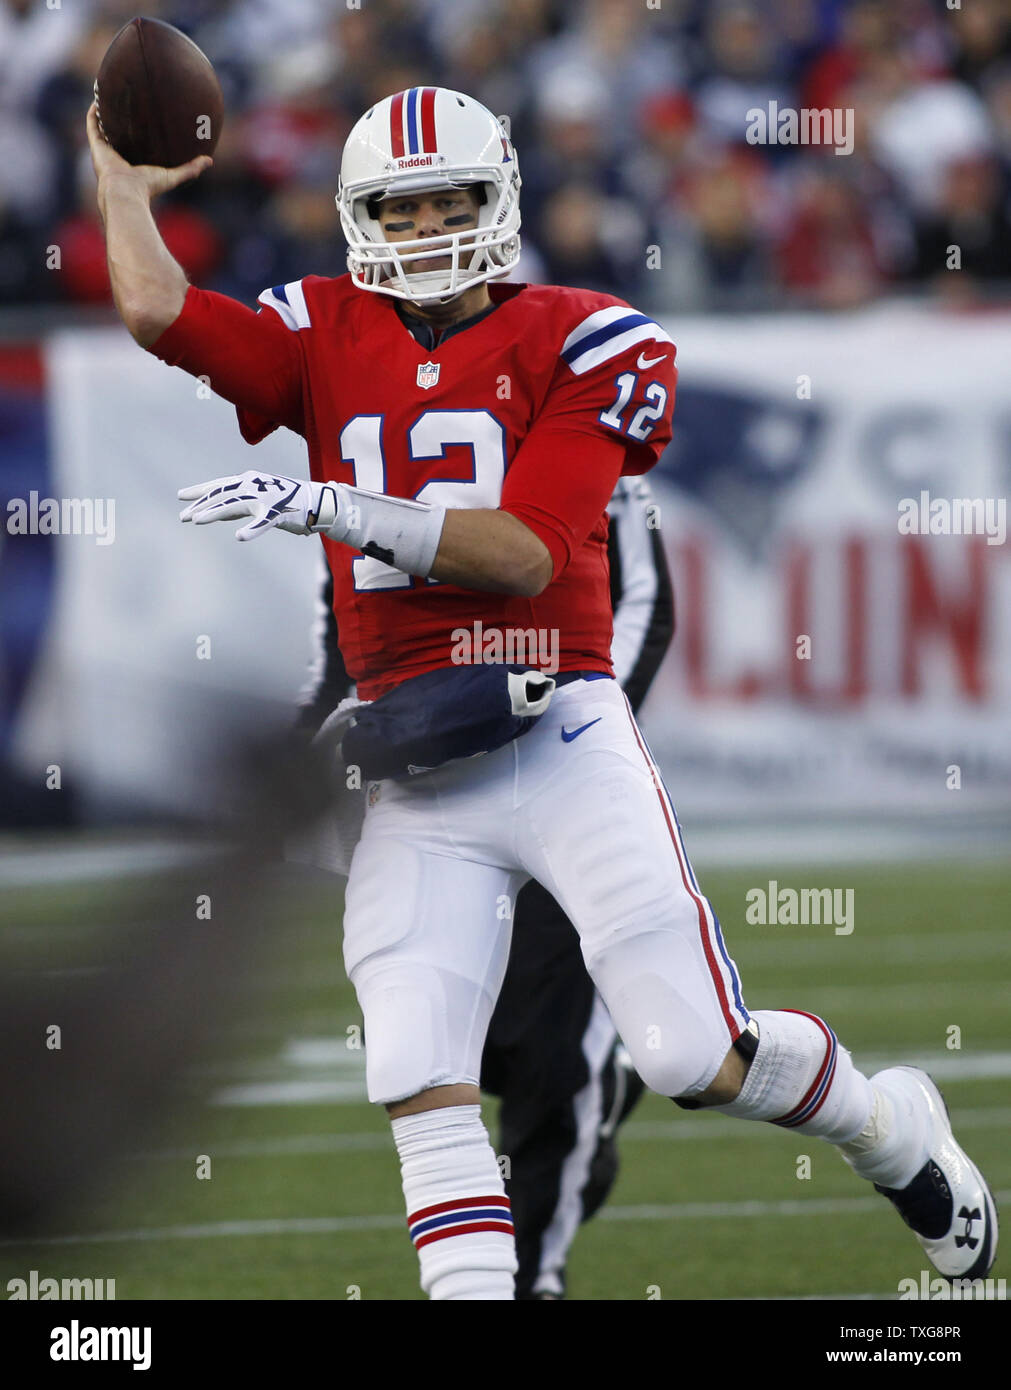 New England Patriots quarterback Tom Brady attempts a pass in the second quarter against the New York Jets at Gillette Stadium in Foxboro, Massachusetts on October 21, 2012.  UPI/Matthew Healey Stock Photo